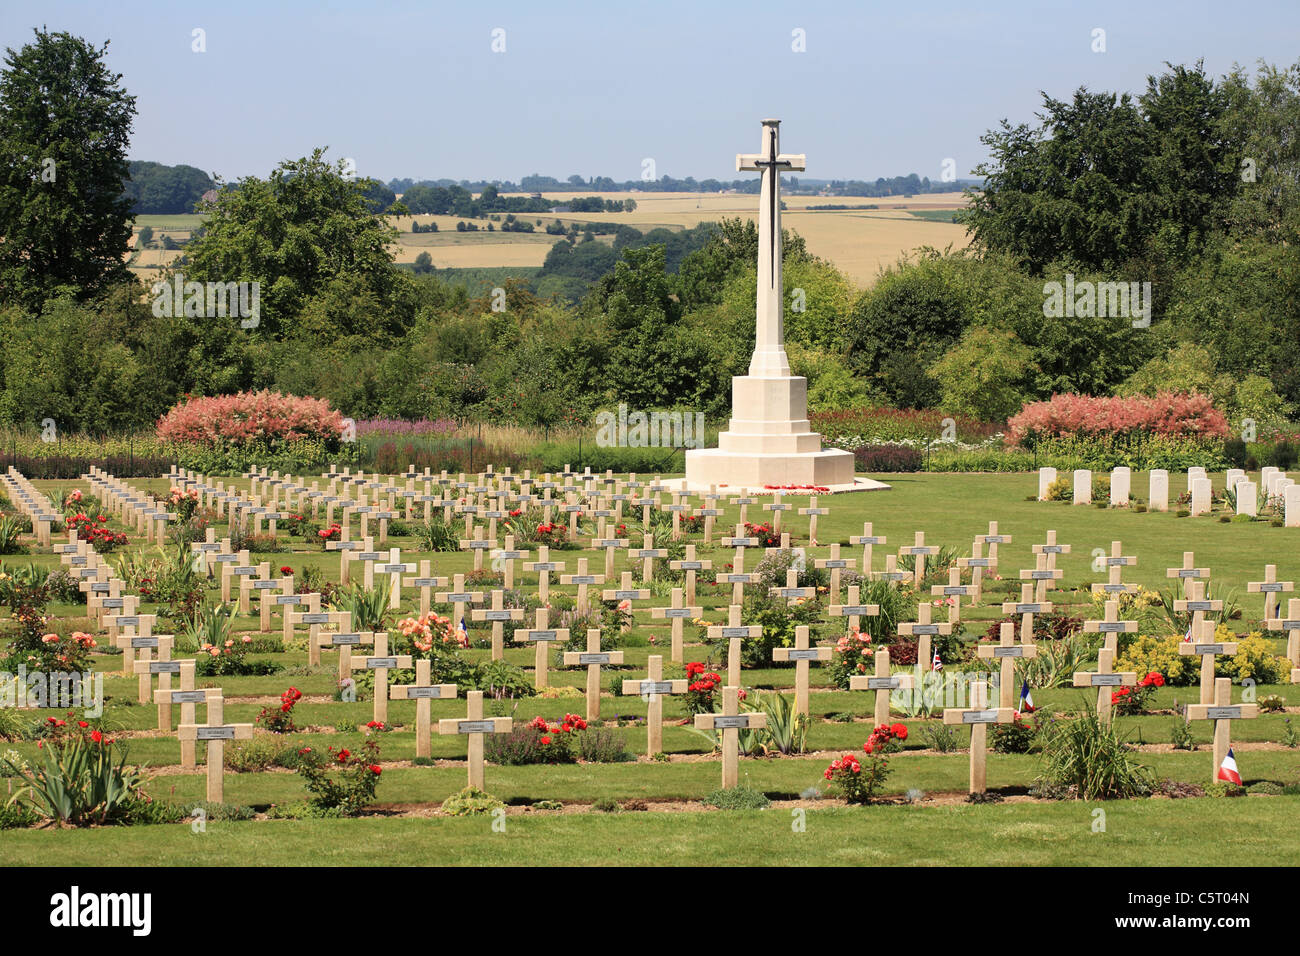 WW1 military cemetery and memorial cross at Thiepval, near Albert, Picardy, France, Europe. Stock Photo